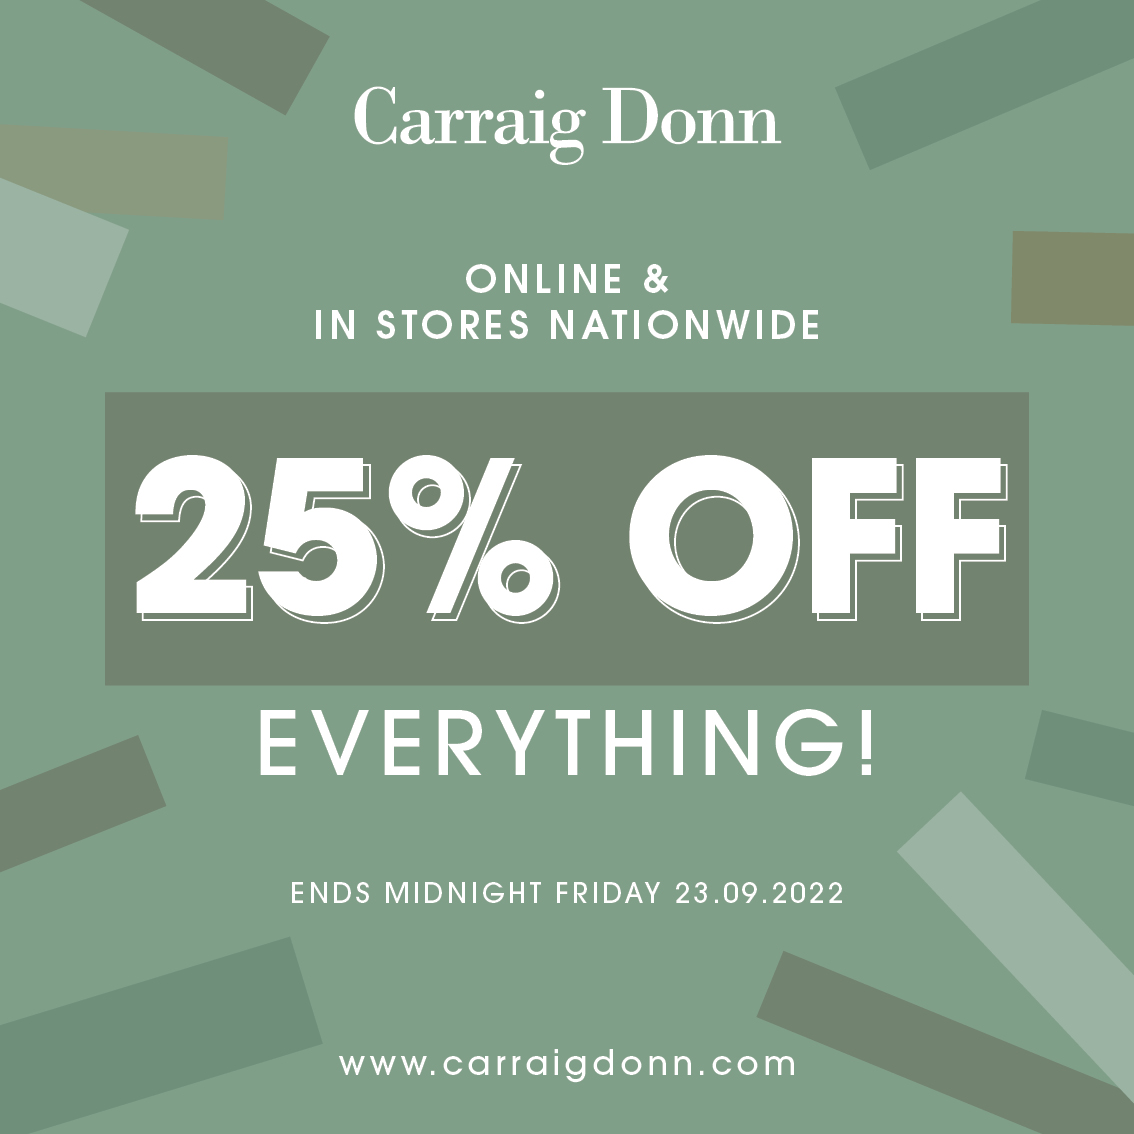 WOW! 25% off Secret Sale in Carraig Donn ONE DAY ONLY Friday Sept 23rd!